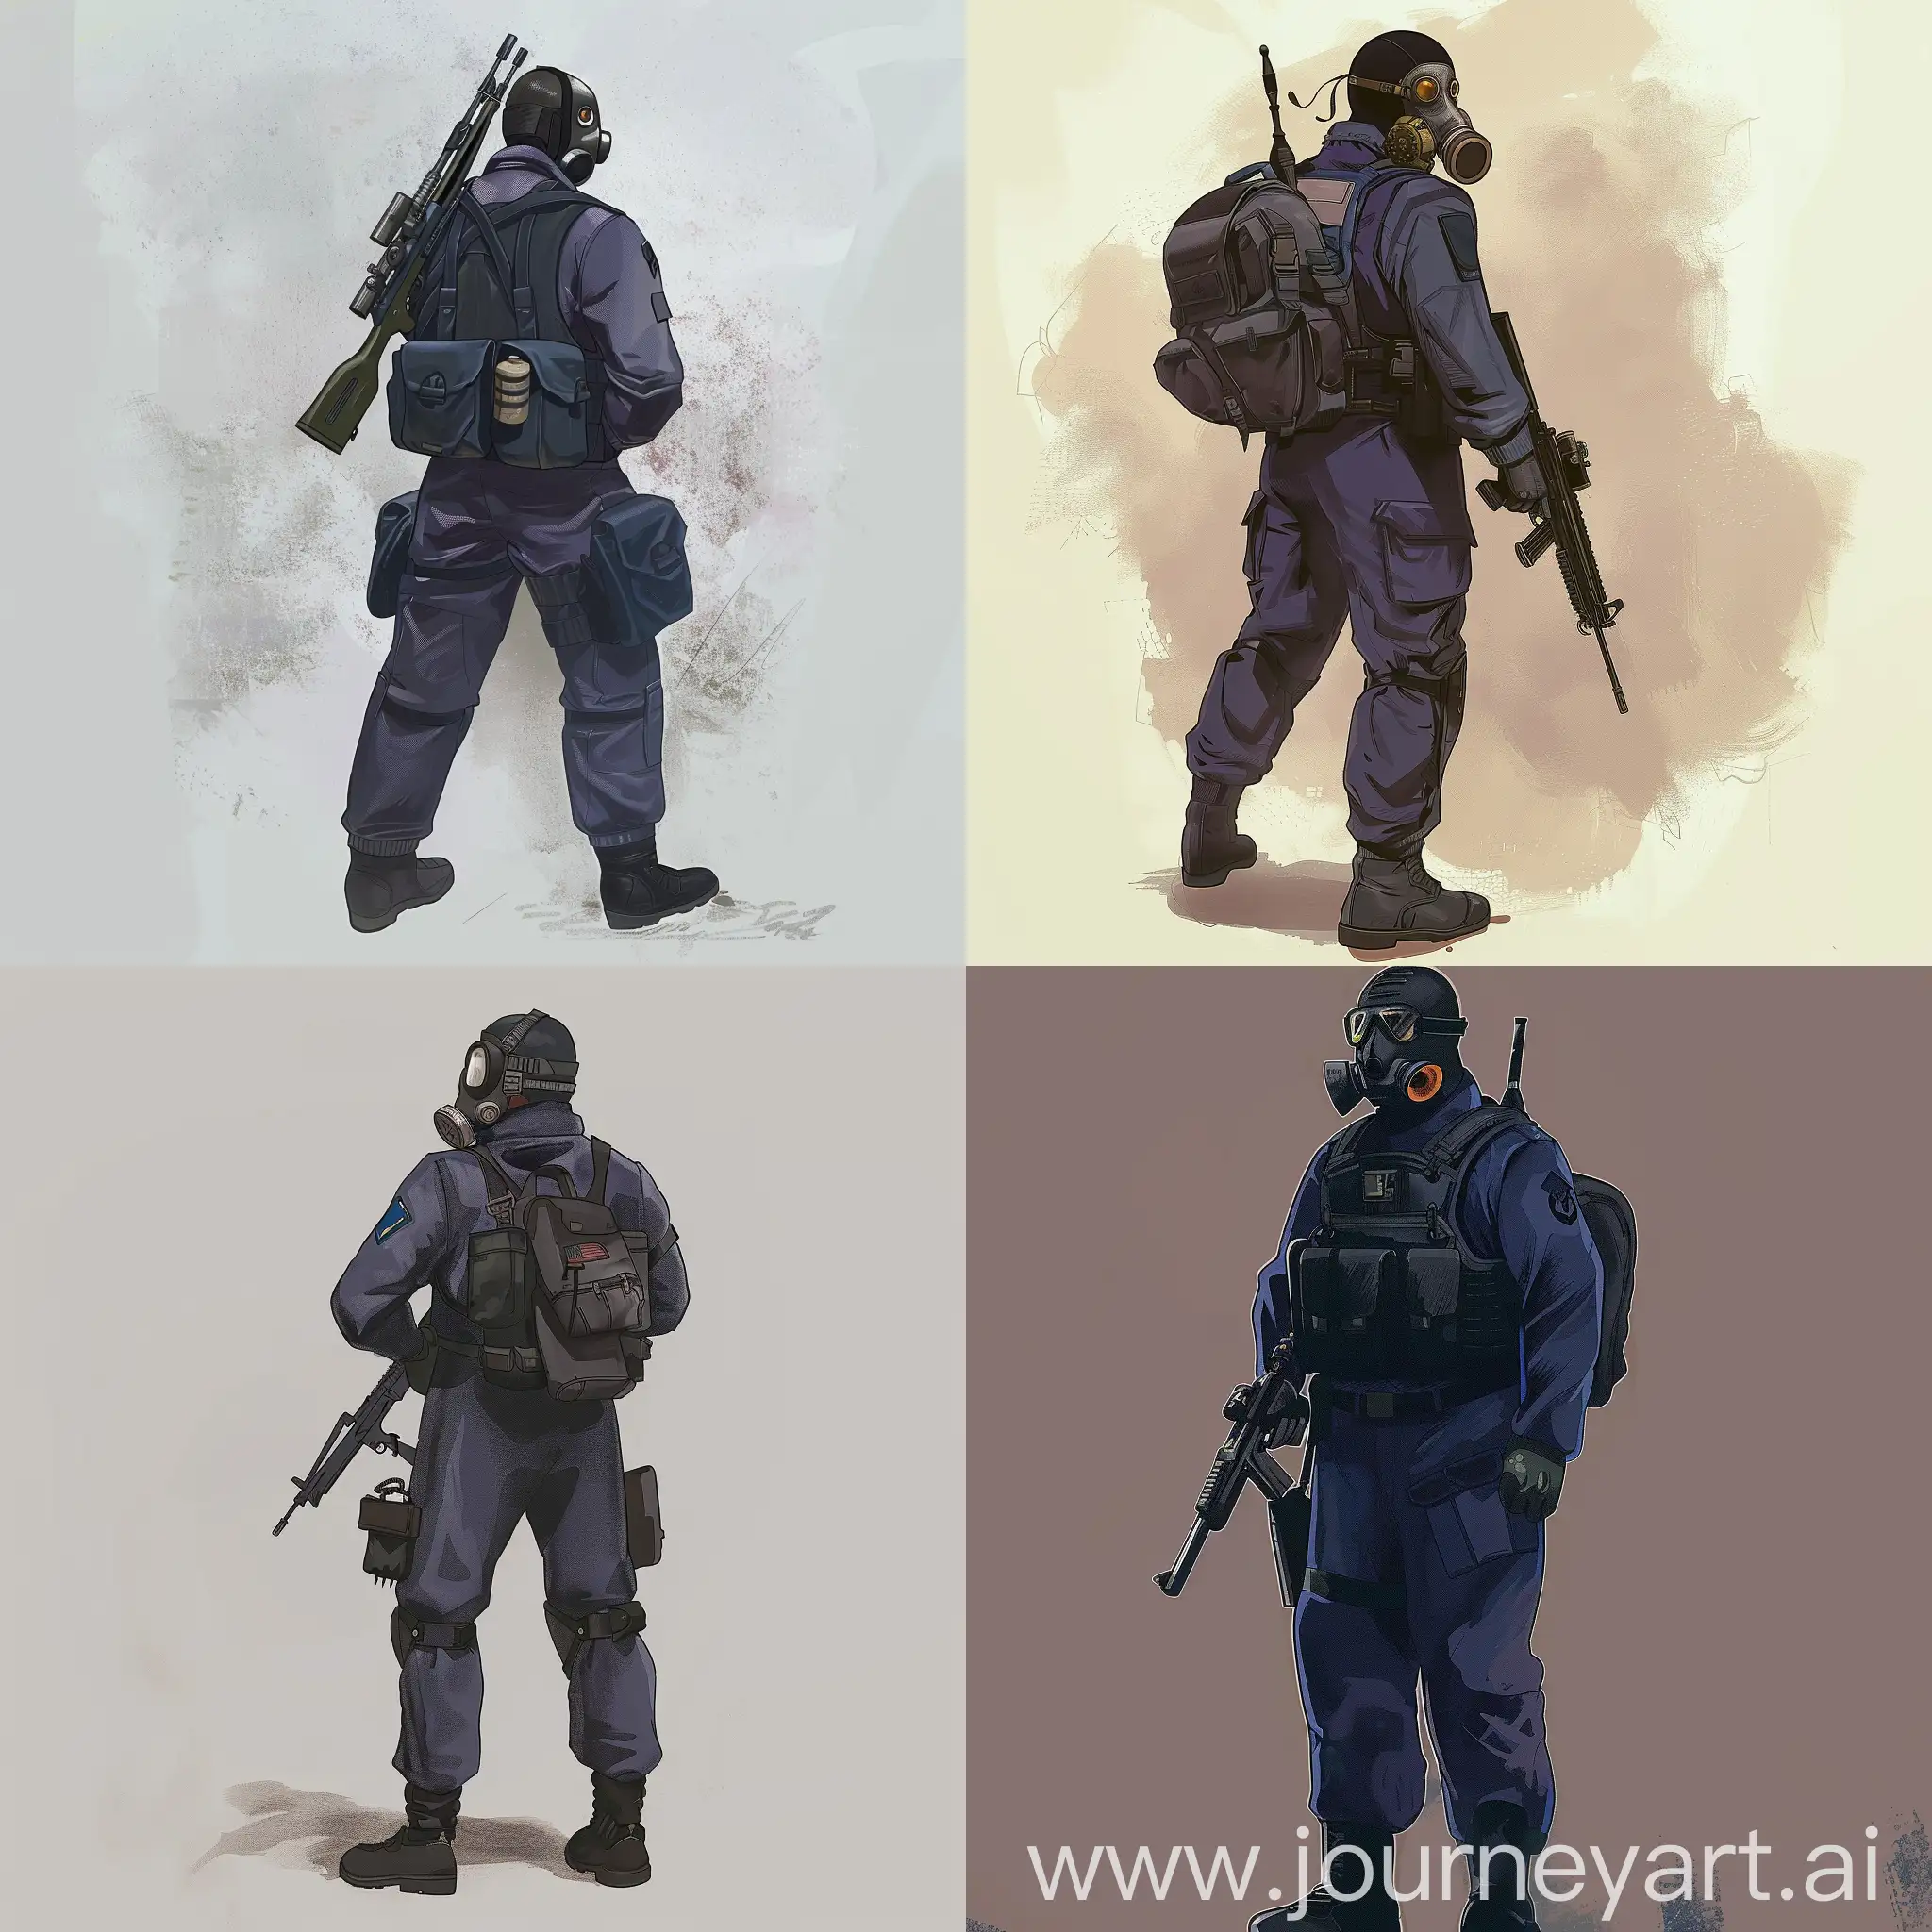 Mercenary-in-Dark-Purple-Military-Jumpsuit-with-Sniper-Rifle-and-Gas-Mask